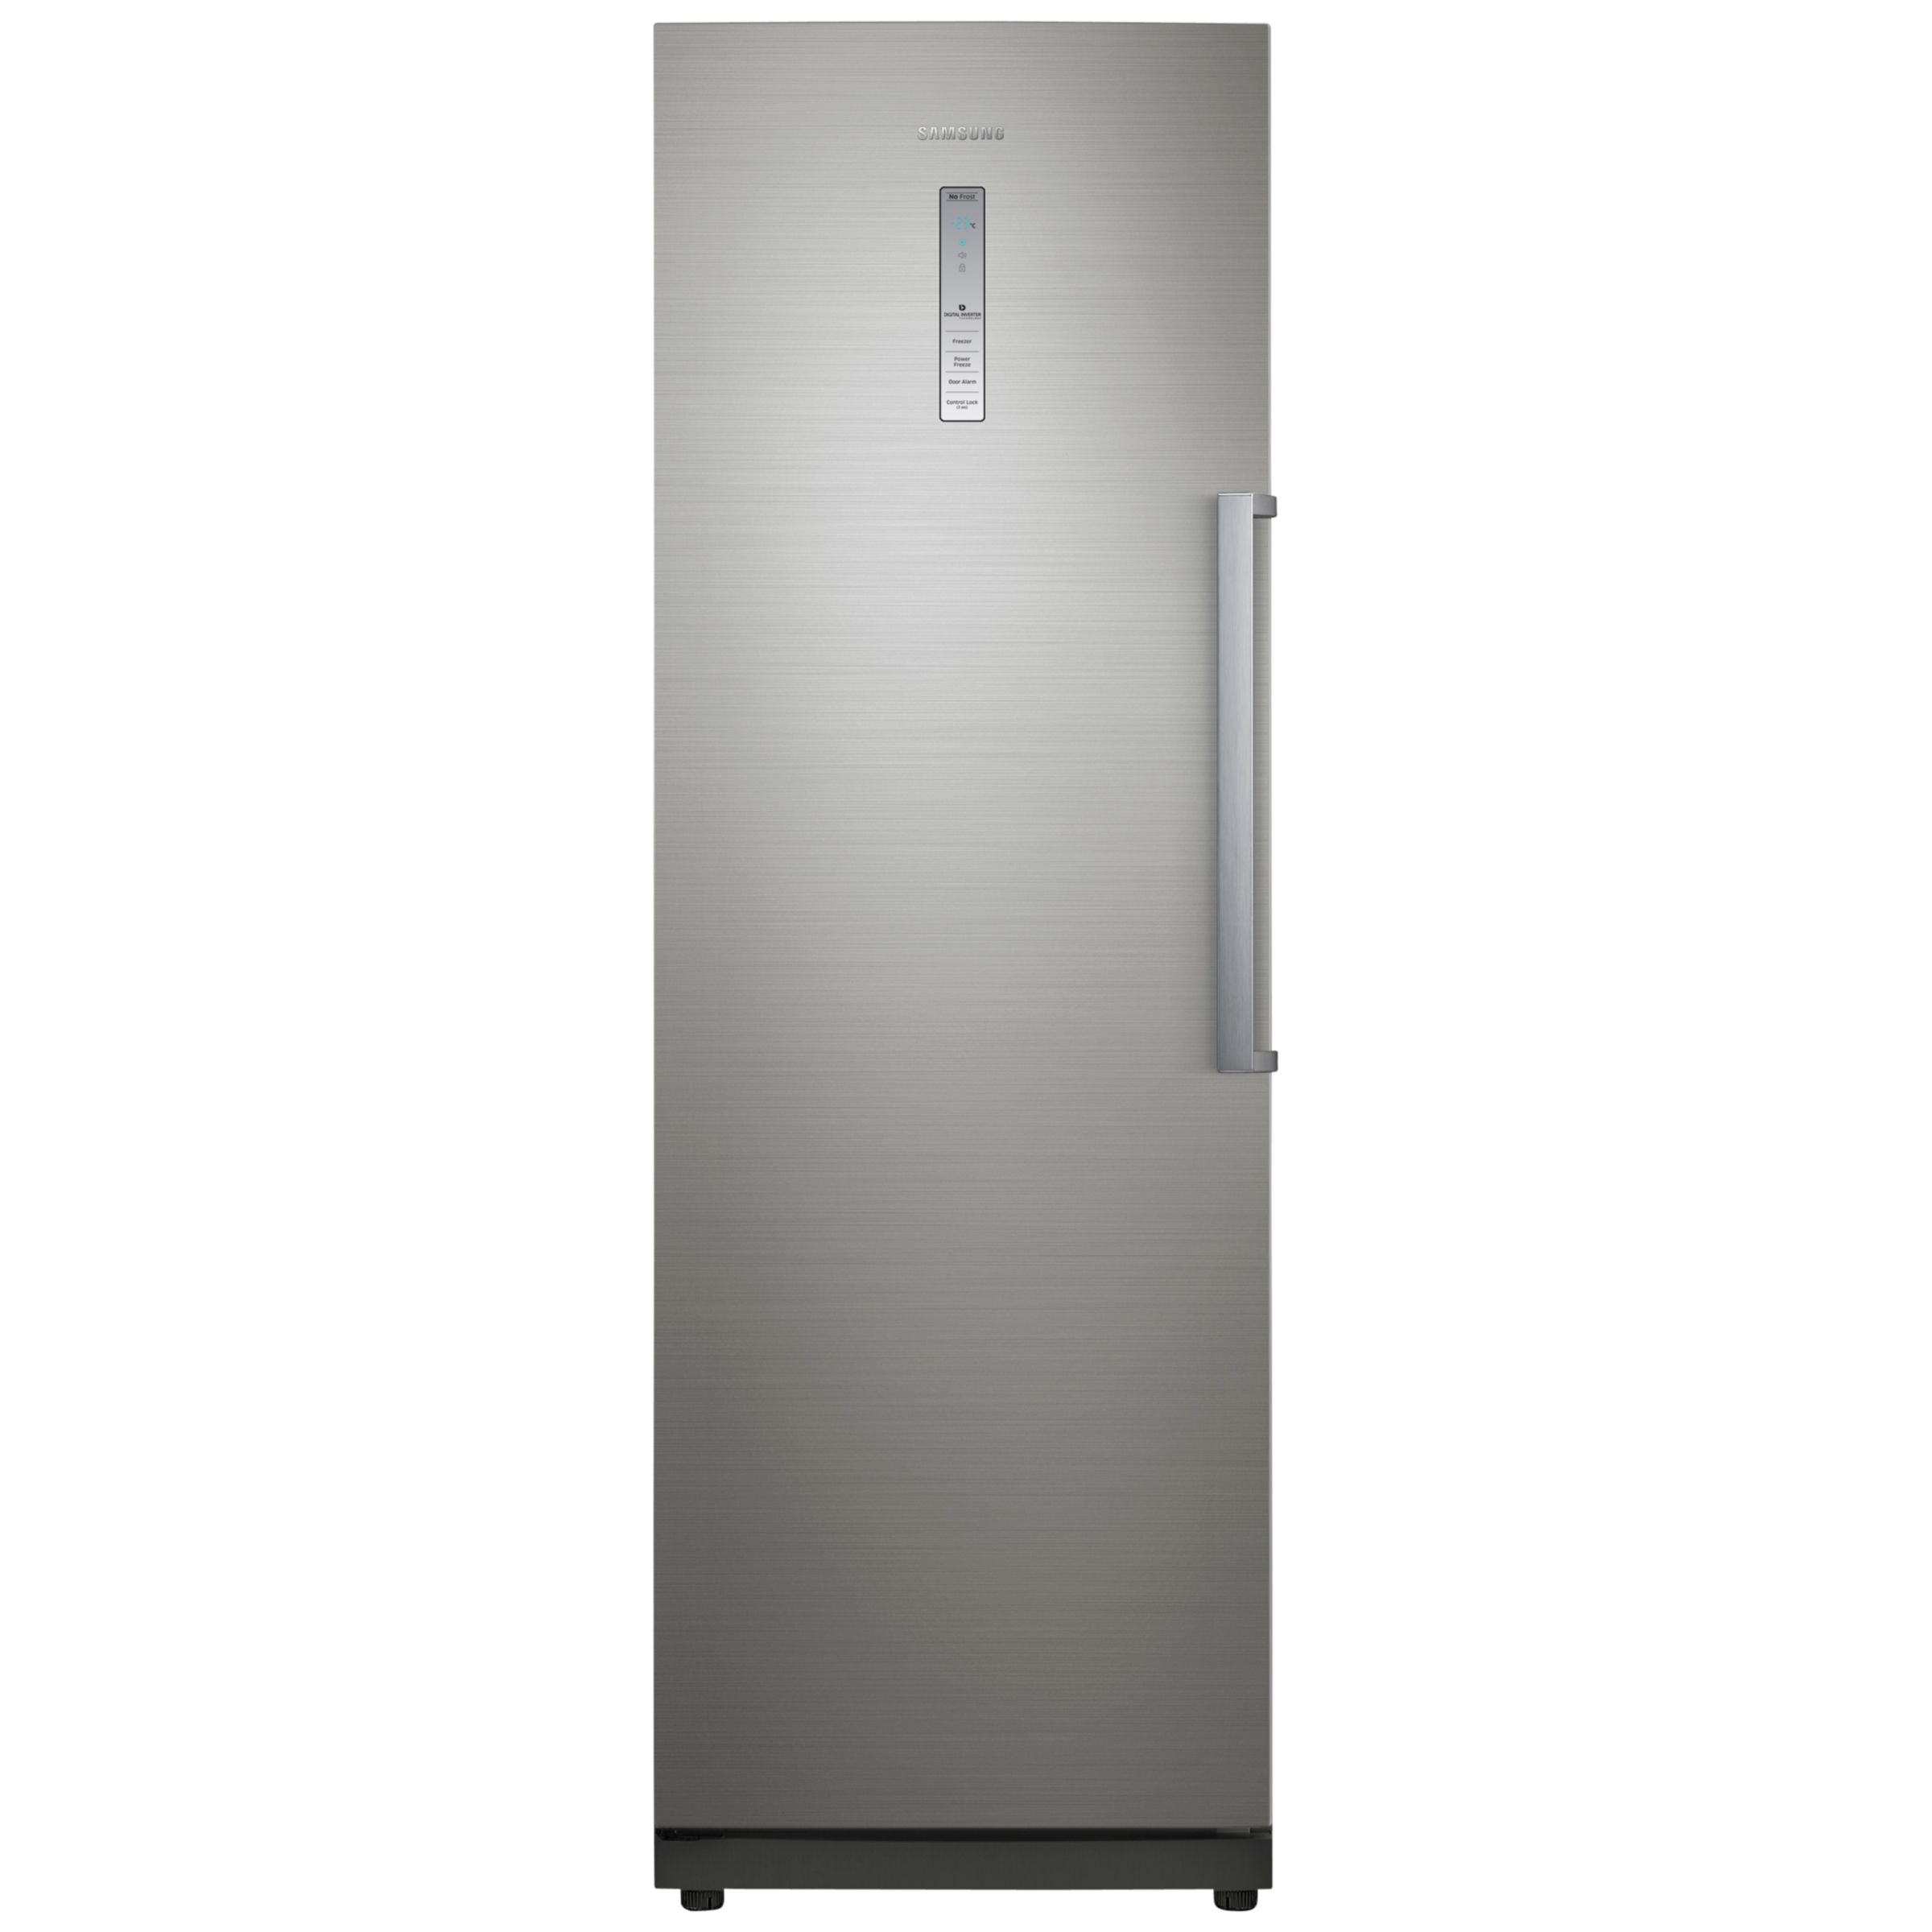 Samsung RZ28H61657F Tall Freezer, A++ Energy Rating, 60cm Wide, Stainless Steel